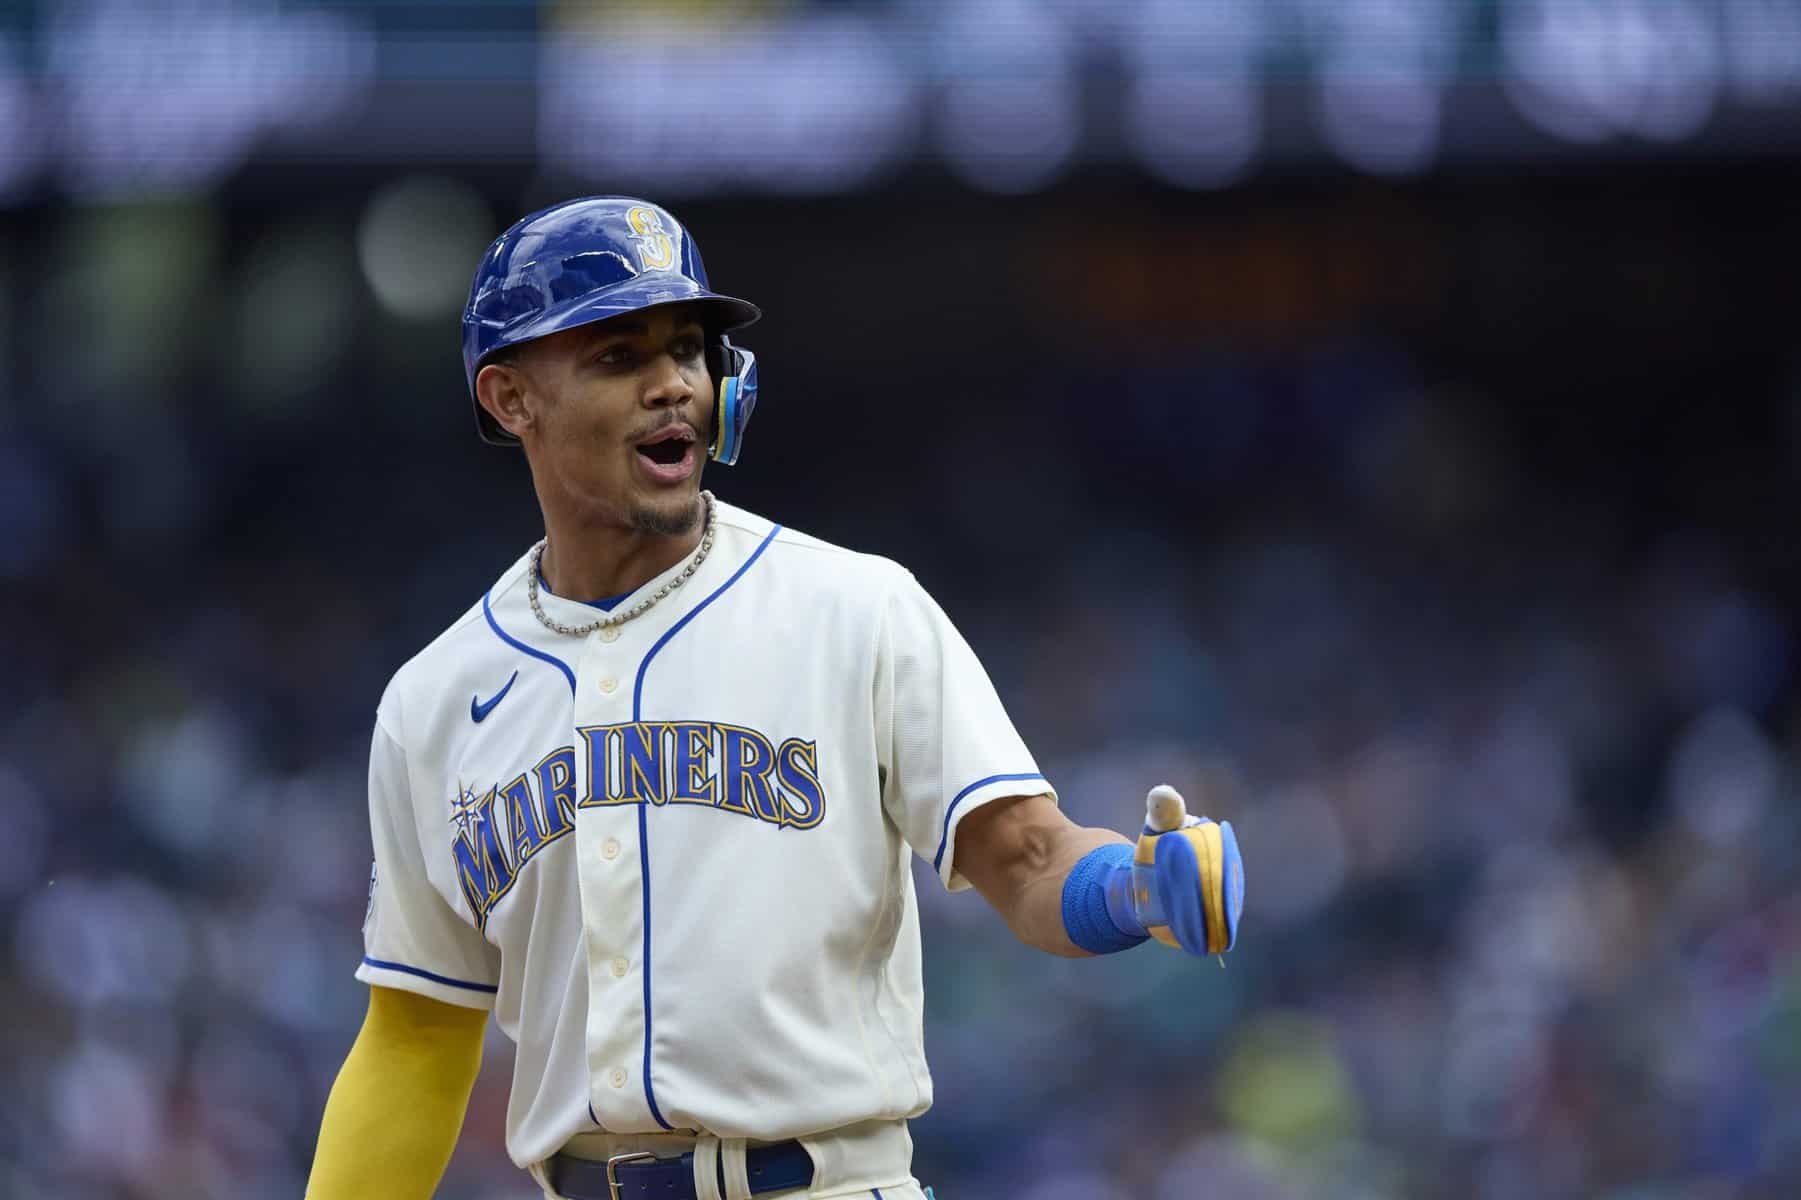 Double Up with Mariners + Luis Castillo (August 27)